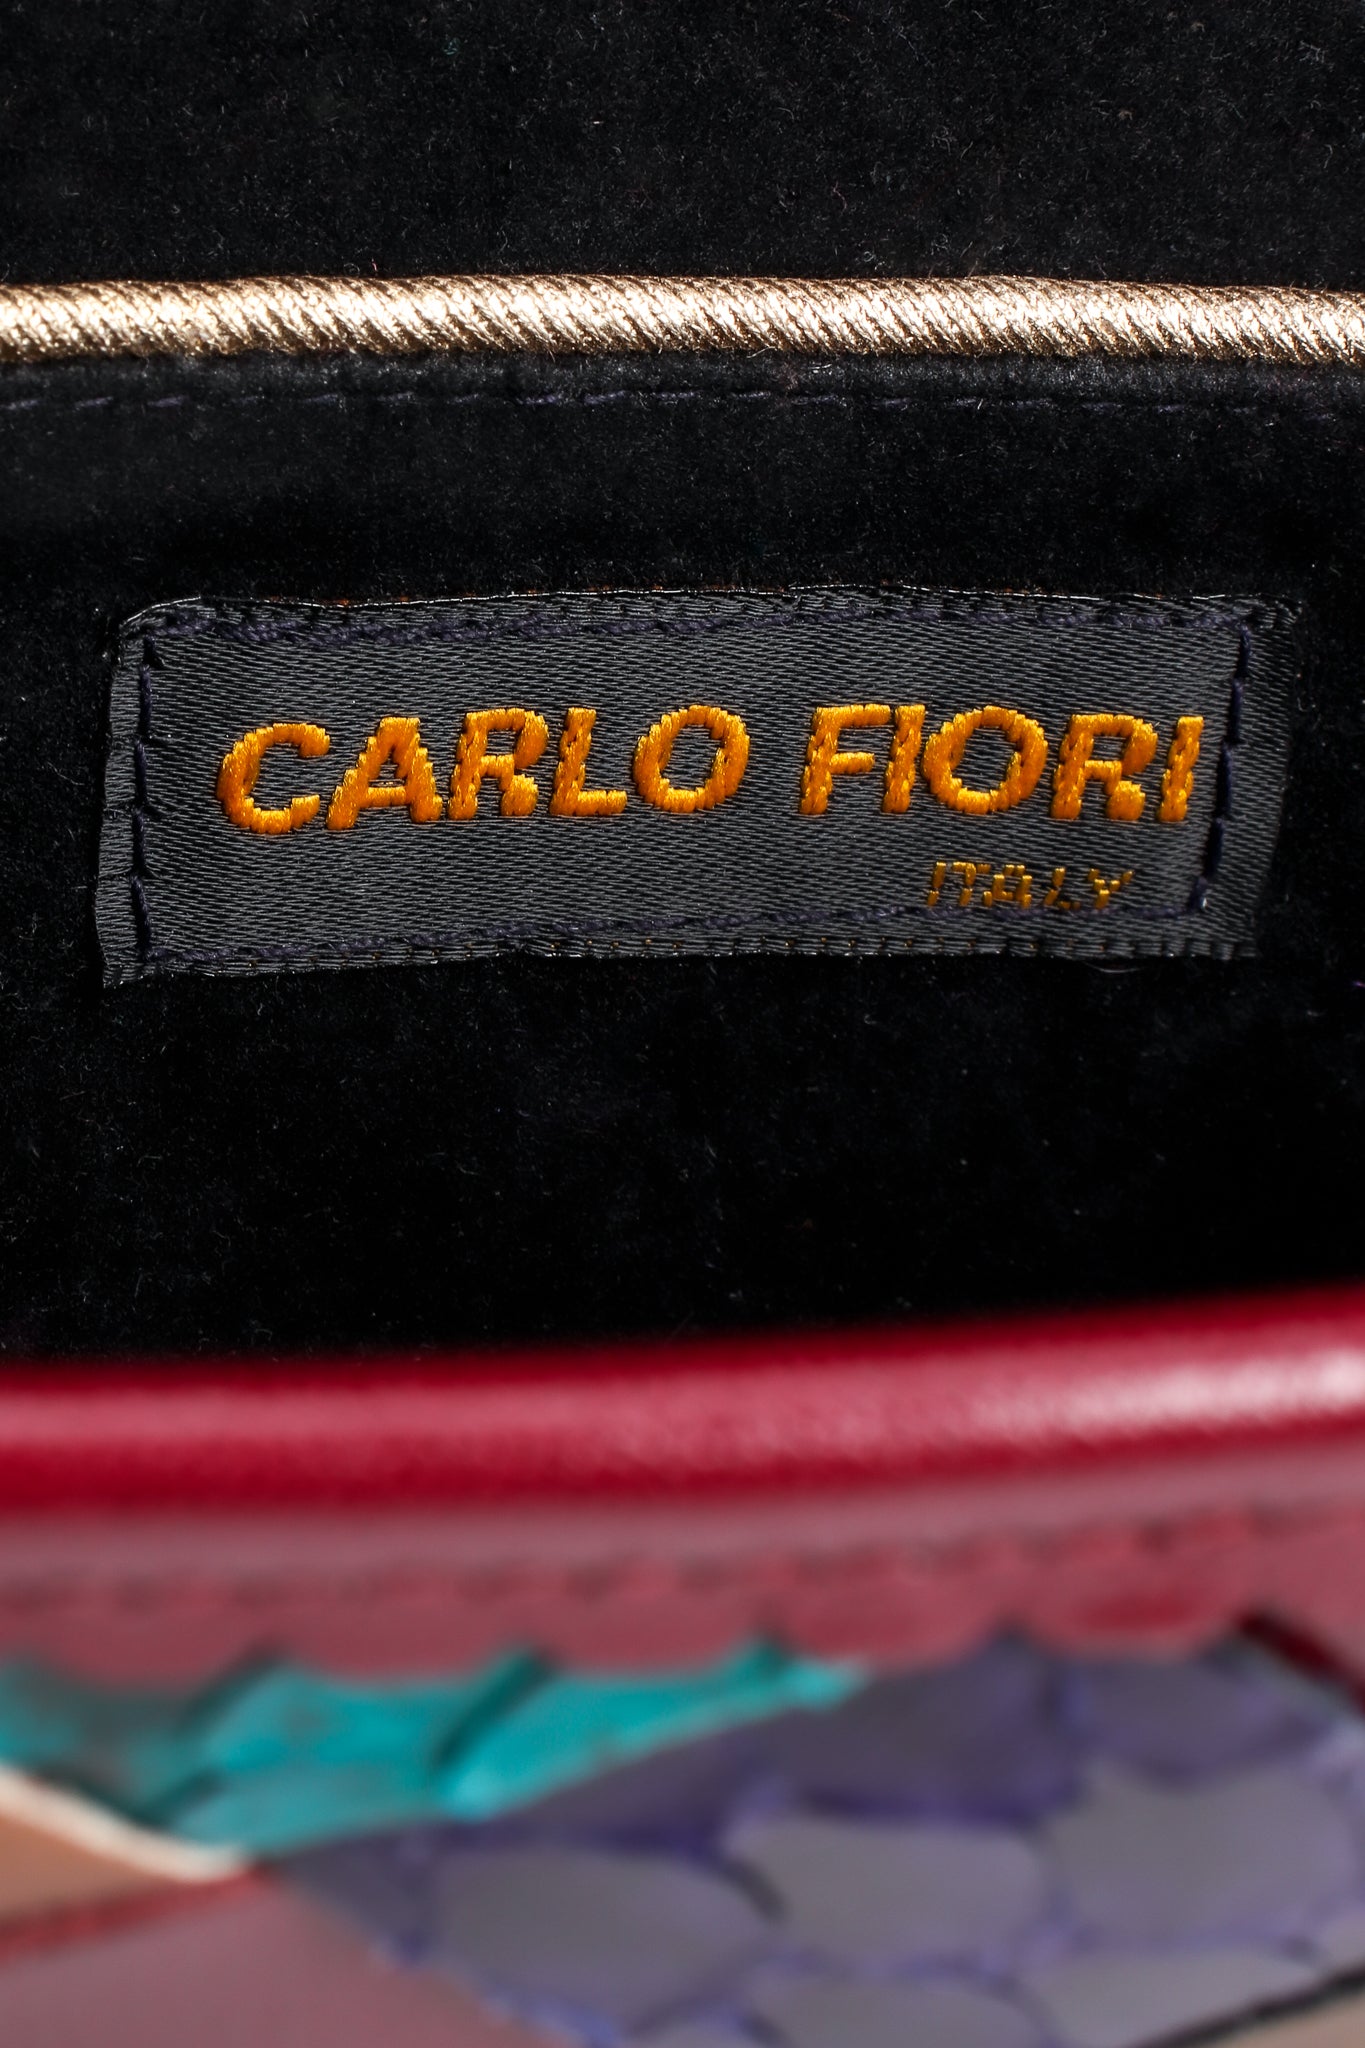 Vintage Carlo Fiori Woven Leather Tassel Bag label at Recess Los Angeles